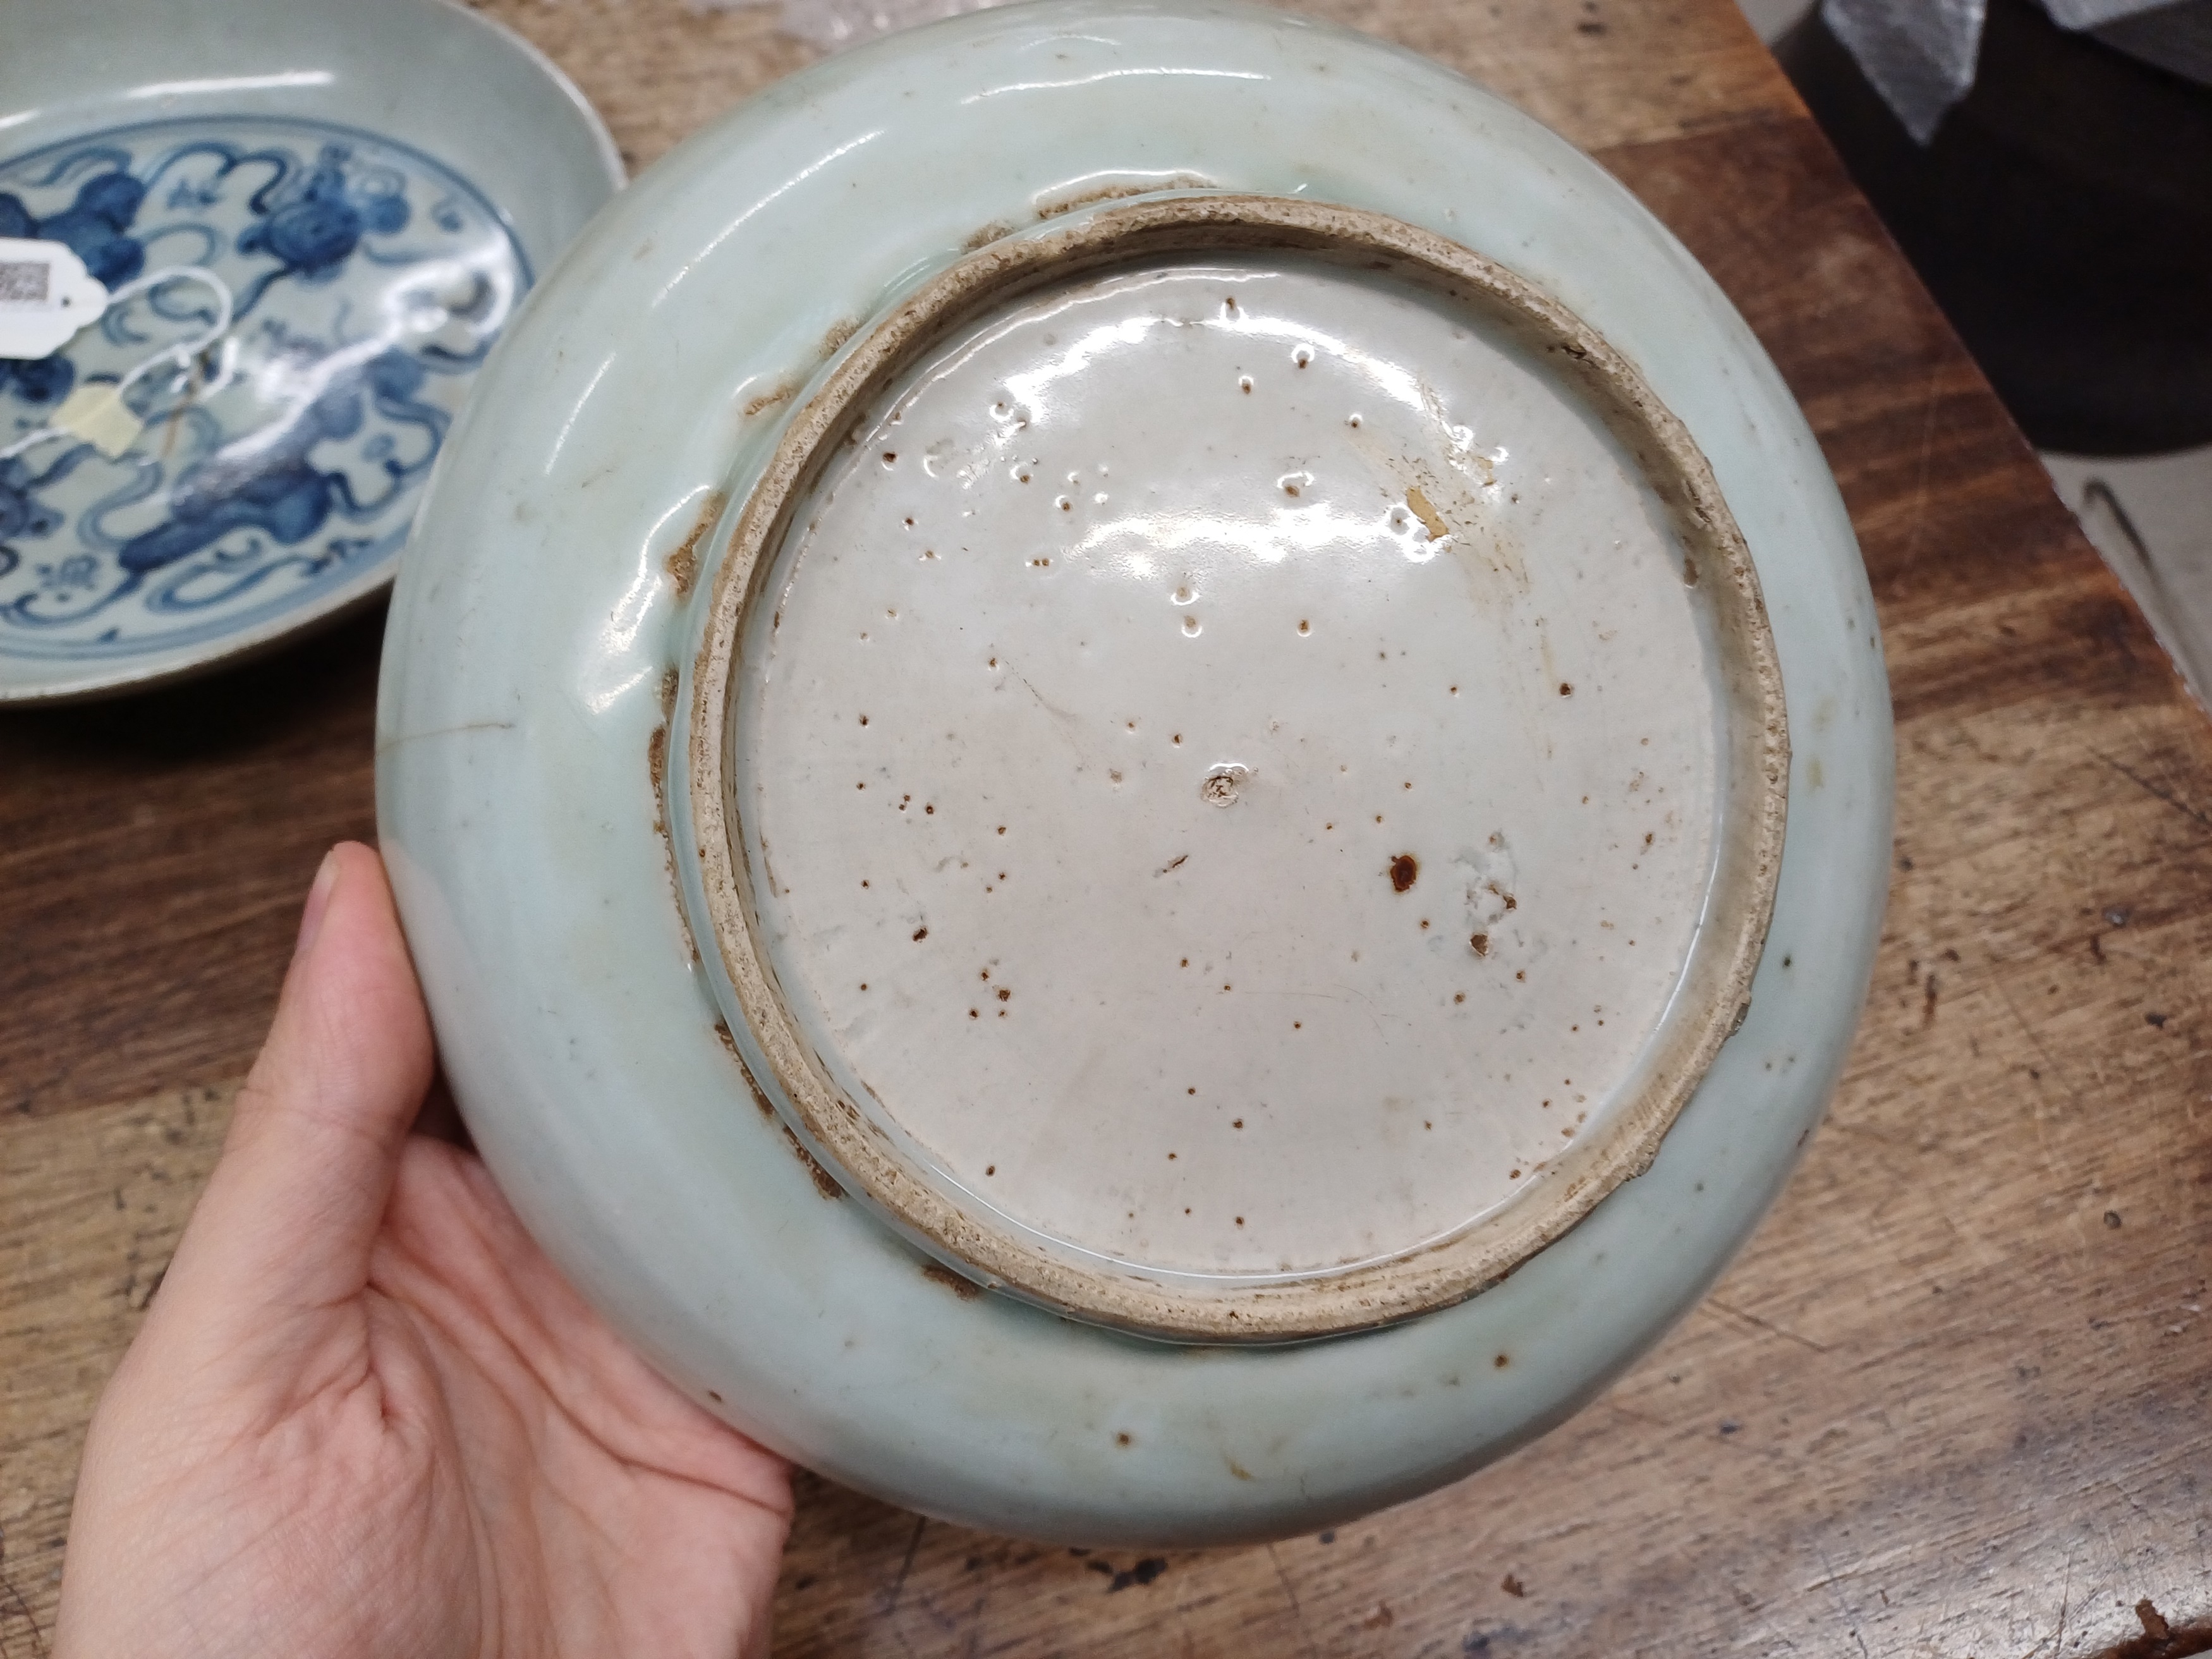 TWO CHINESE BLUE AND WHITE DISHES 明 青花瑞獸紋盤兩件 - Image 5 of 10